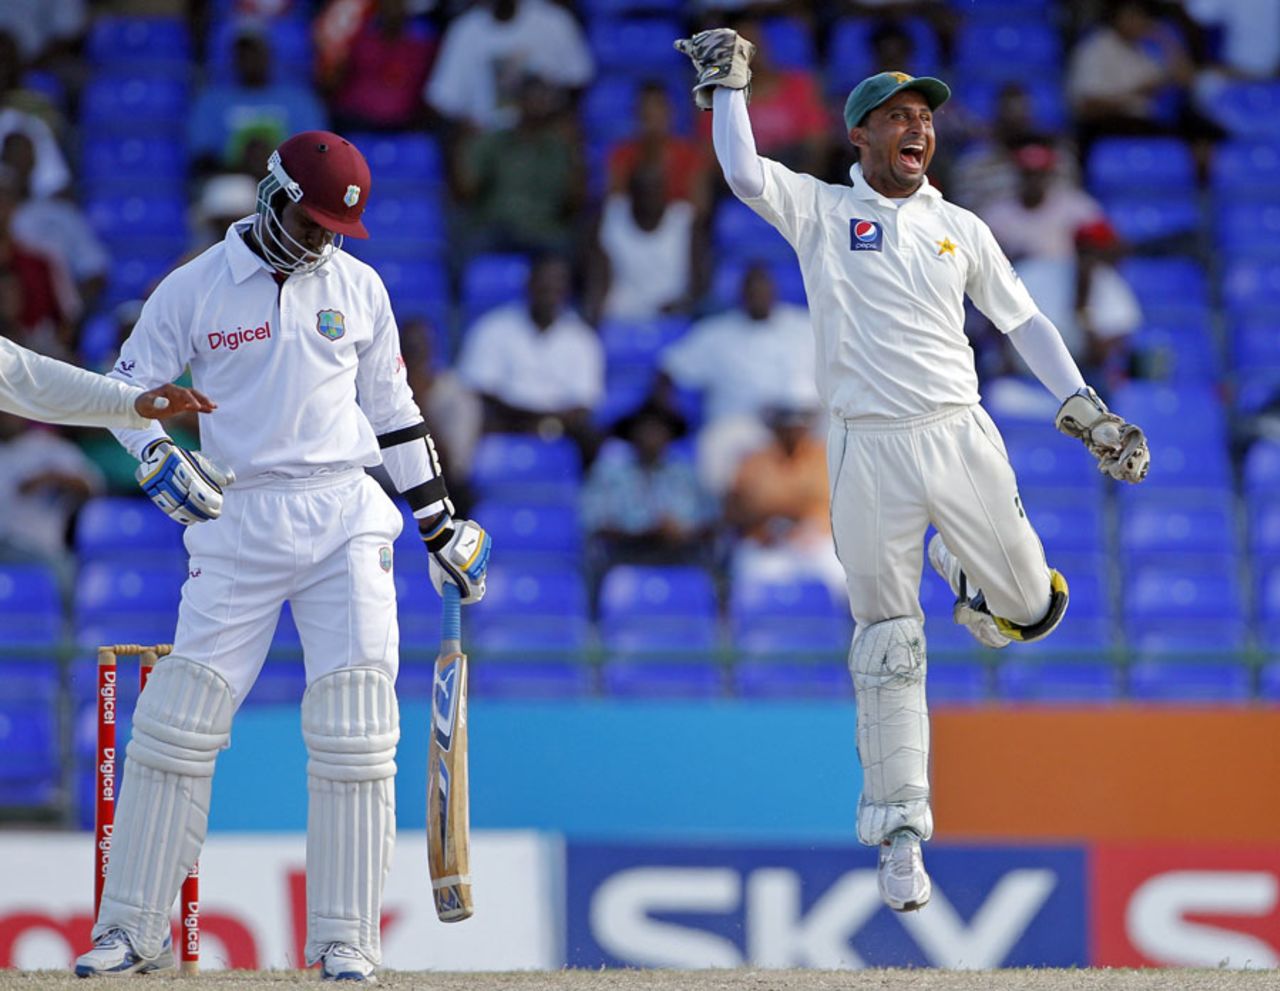 Mohammad Salman is thrilled after pouching Marlon Samuels, West Indies v Pakistan, 2nd Test, St Kitts, 4th day, May 23, 2011